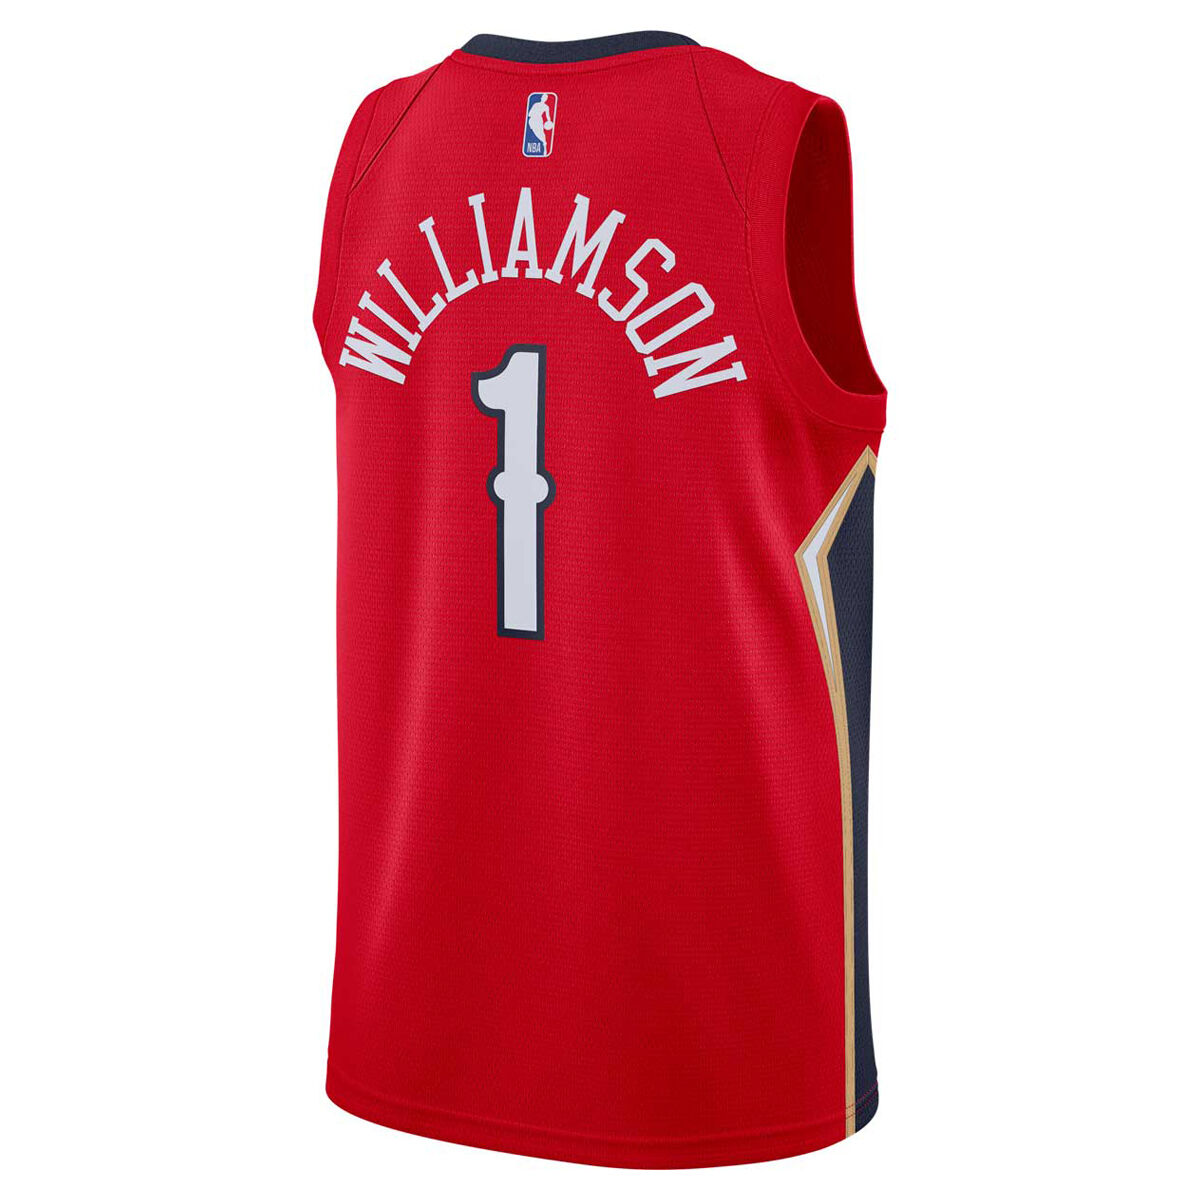 new orleans pelicans jersey nike